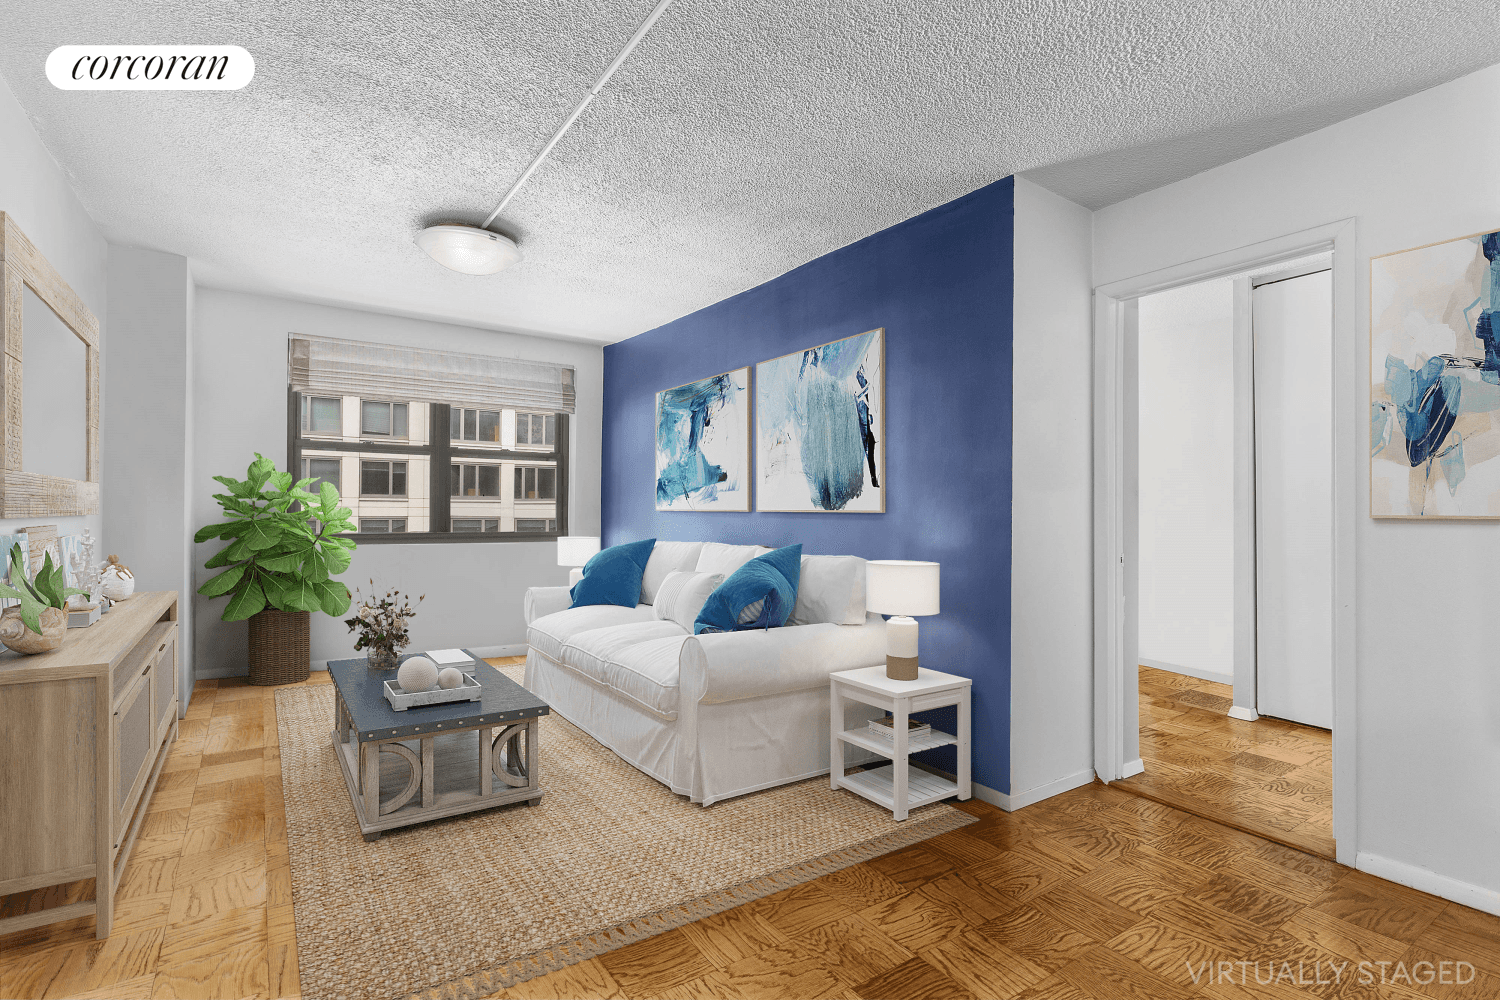 Welcome home to apartment 603, a lovely one bedroom one bathroom coop apartment at The Crystal House ; located downtown at the nexus of Gramercy, Murray Hill, and Kips Bay.